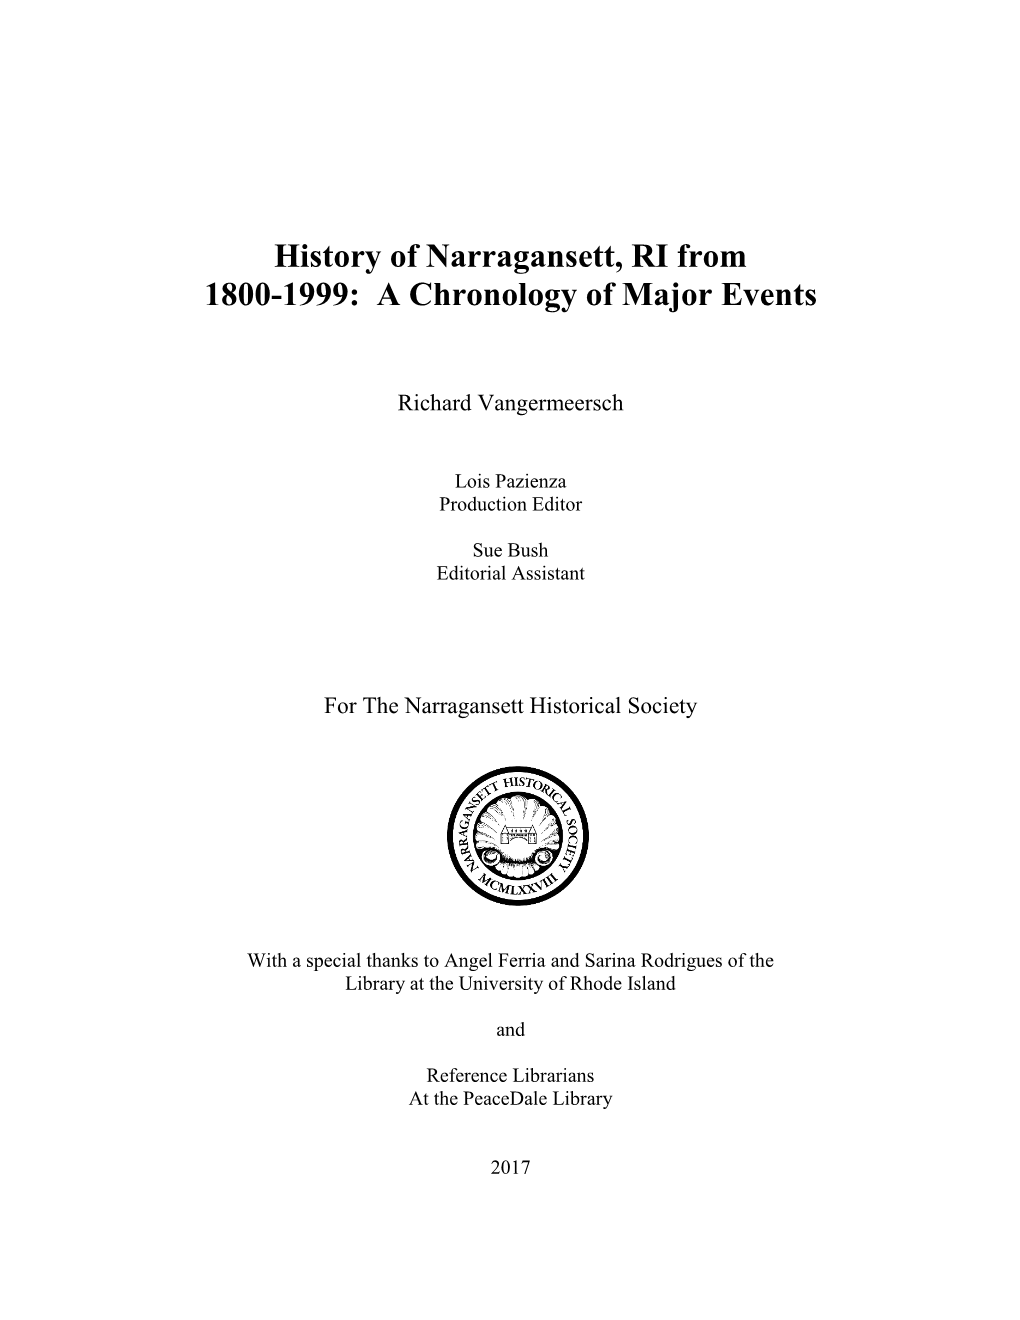 History of Narragansett, RI from 1800-1999: a Chronology of Major Events